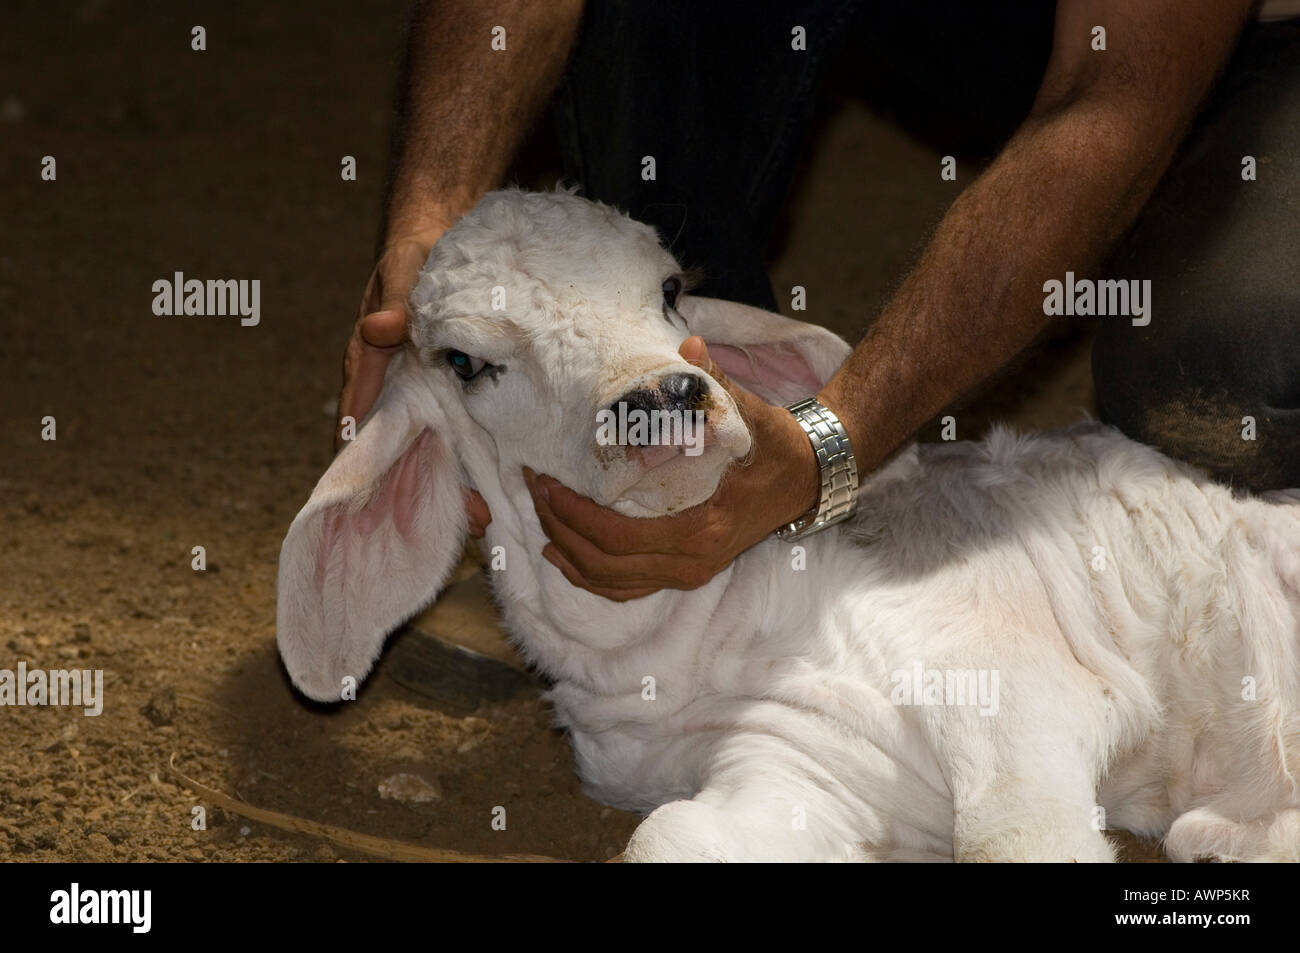 Calf laying down, about to be branded and ear-tagged, Costa Rica, Central America Stock Photo